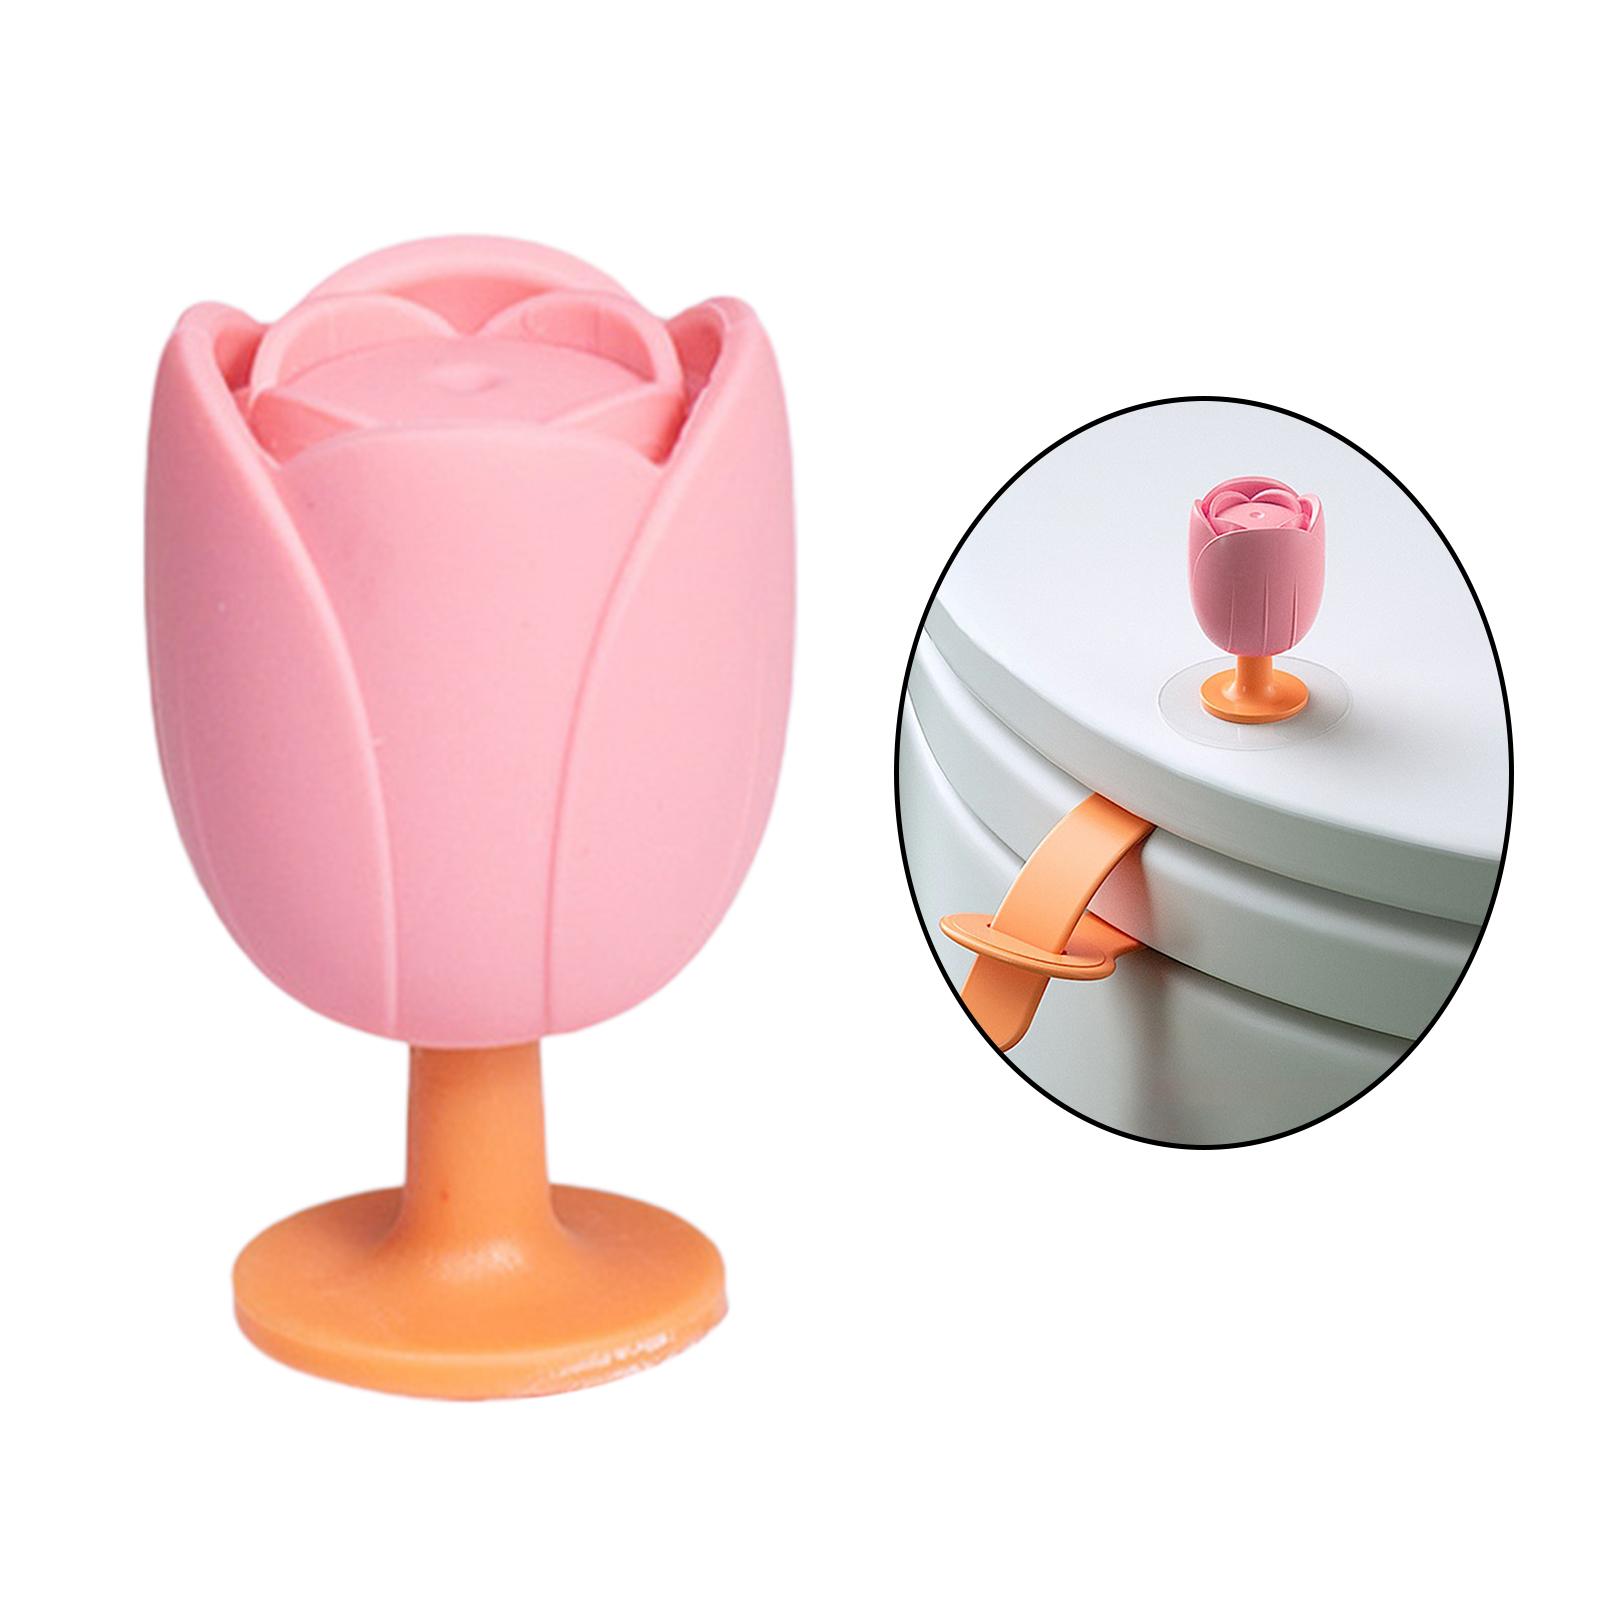 Floral Toilet Cover Lifter Avoid Touching Portable Lift Tool for Office Orange Cover Lifter